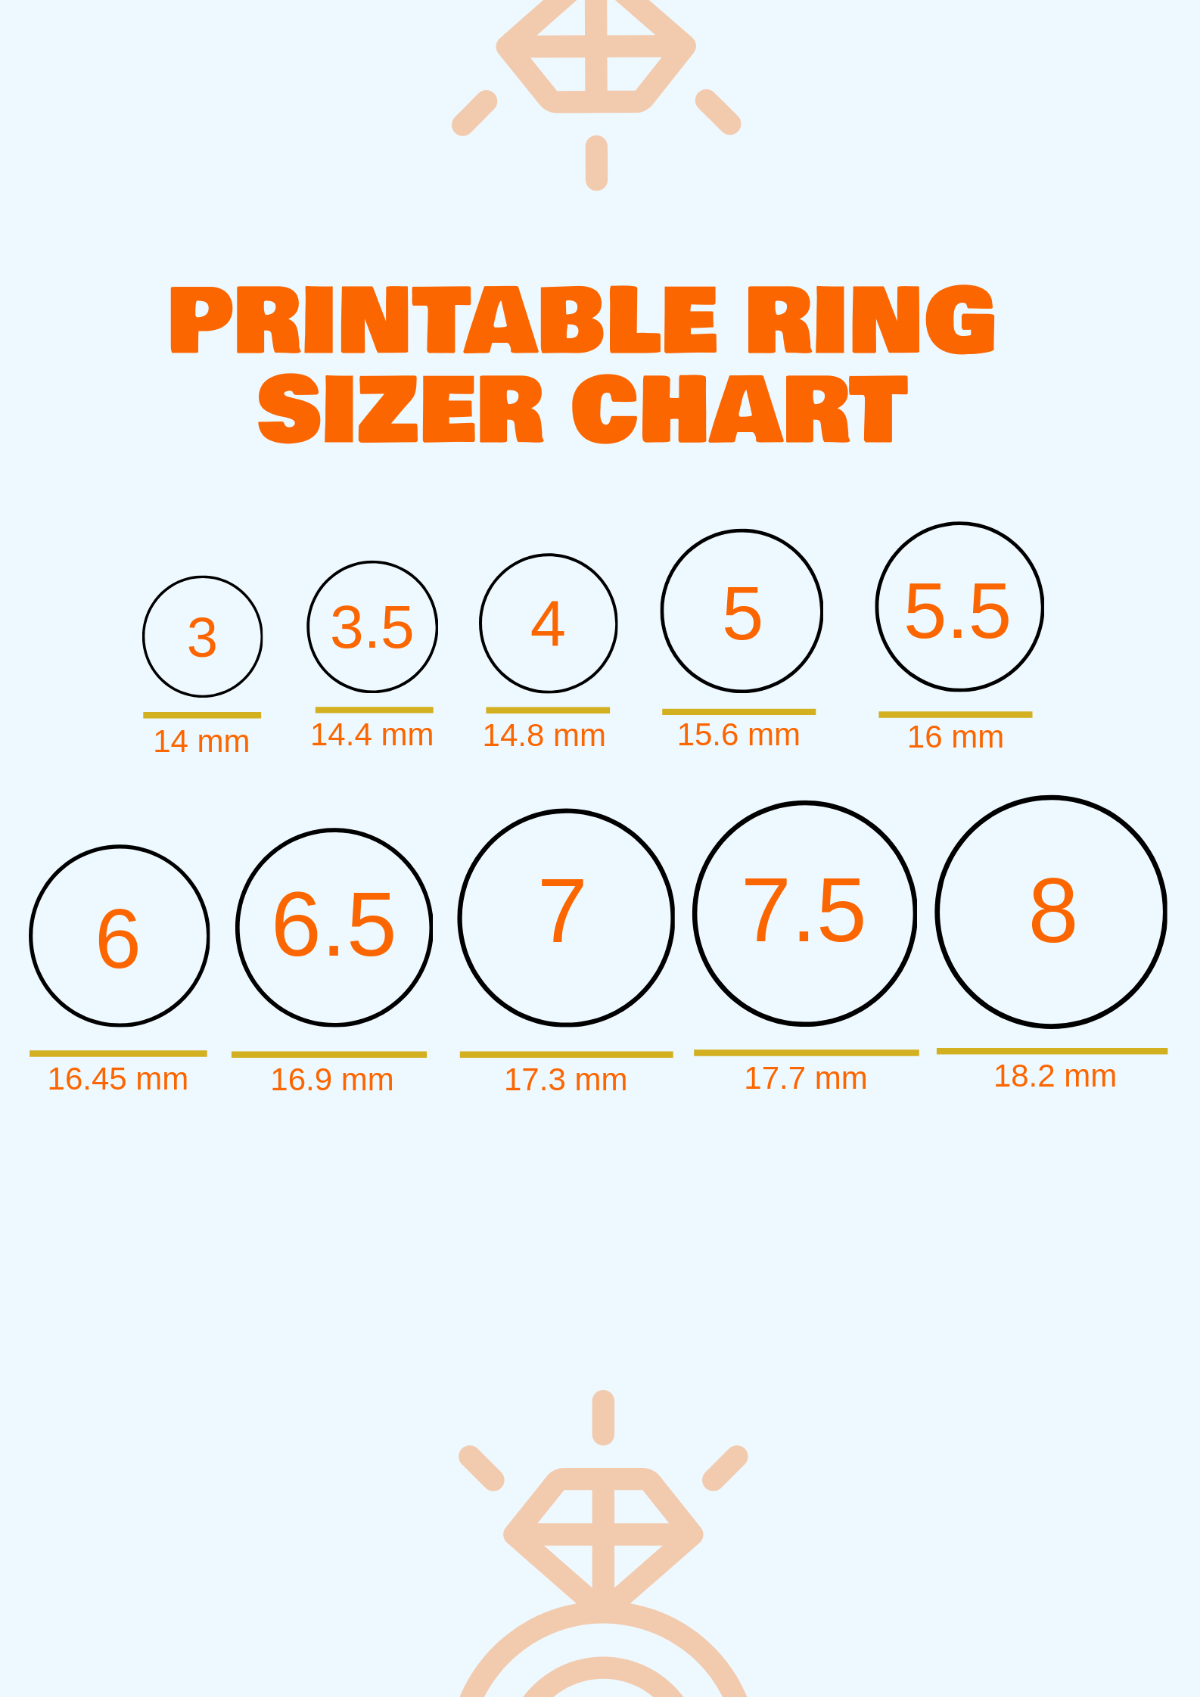 Personal Printable Ring Sizer Chart Template